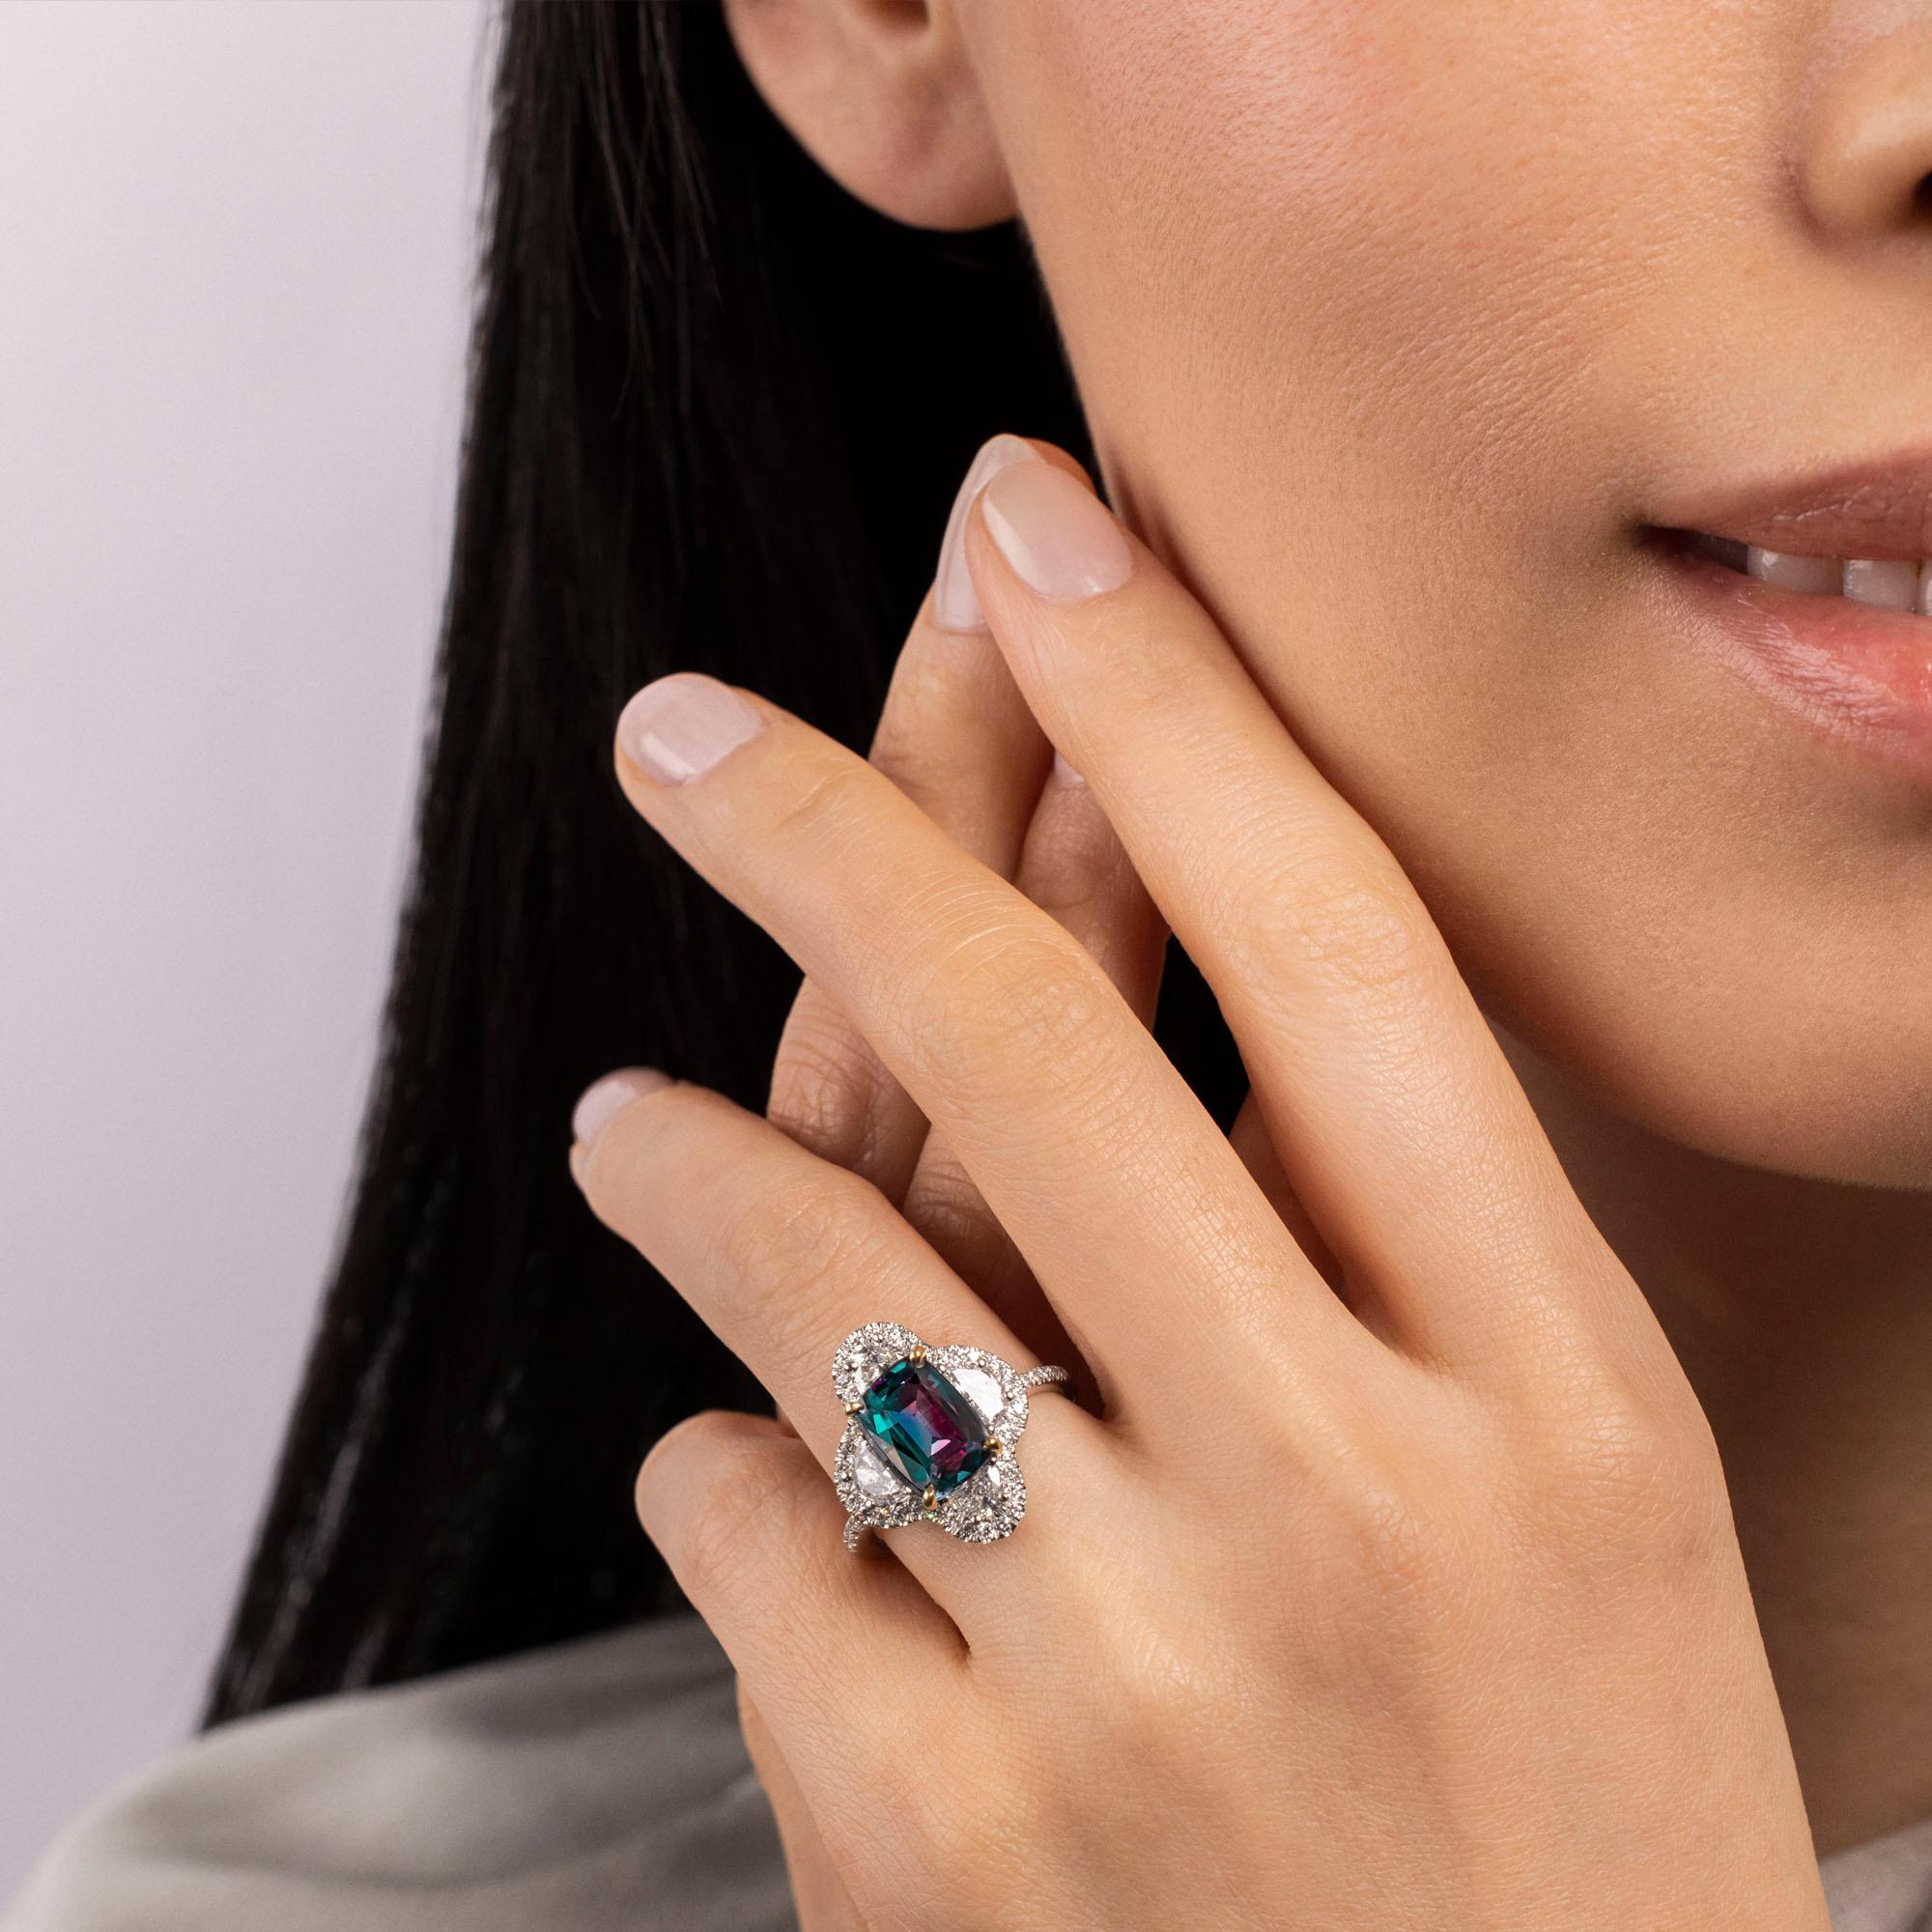 This one of a kind marvel is a one of one in existence. Alexandrite at sizes greater 1 carat are rarely found across all geographic sources to begin with, but 1 carat stones from Brazil are even rarer. Sitting at 2.99 carats, this stone is a true